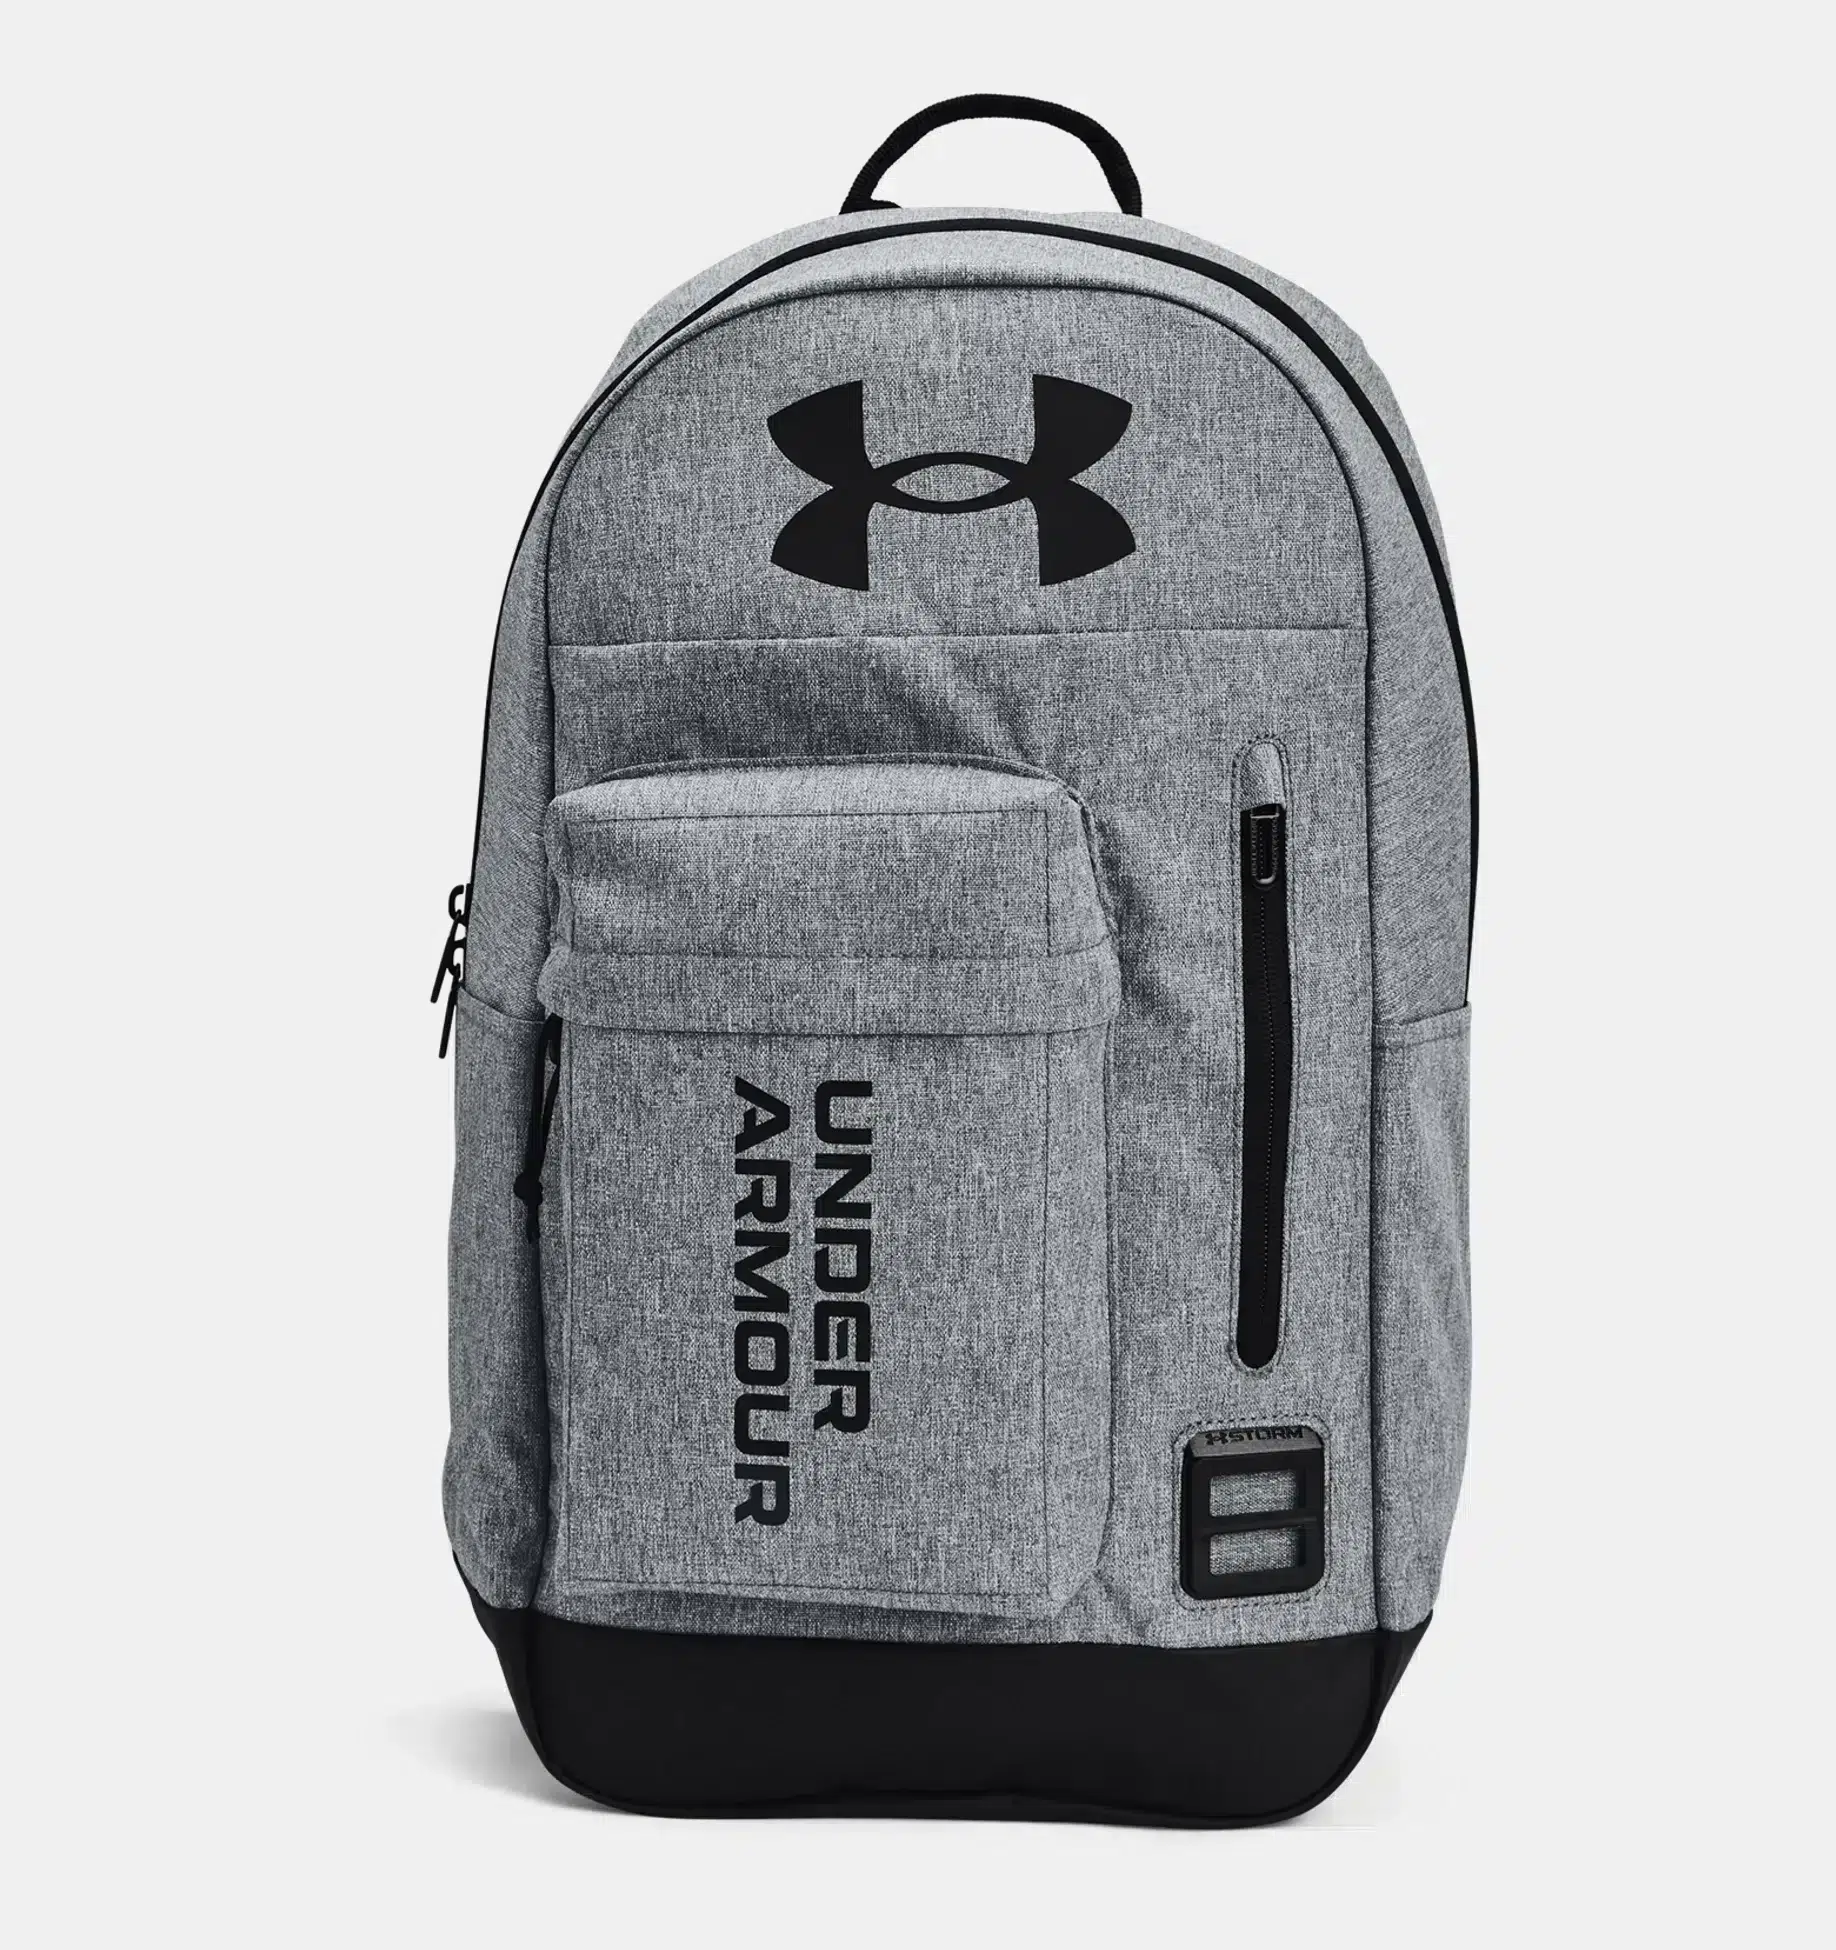 Under Armour - Halftime Backpack - Pitch Gray / Black thumbnail